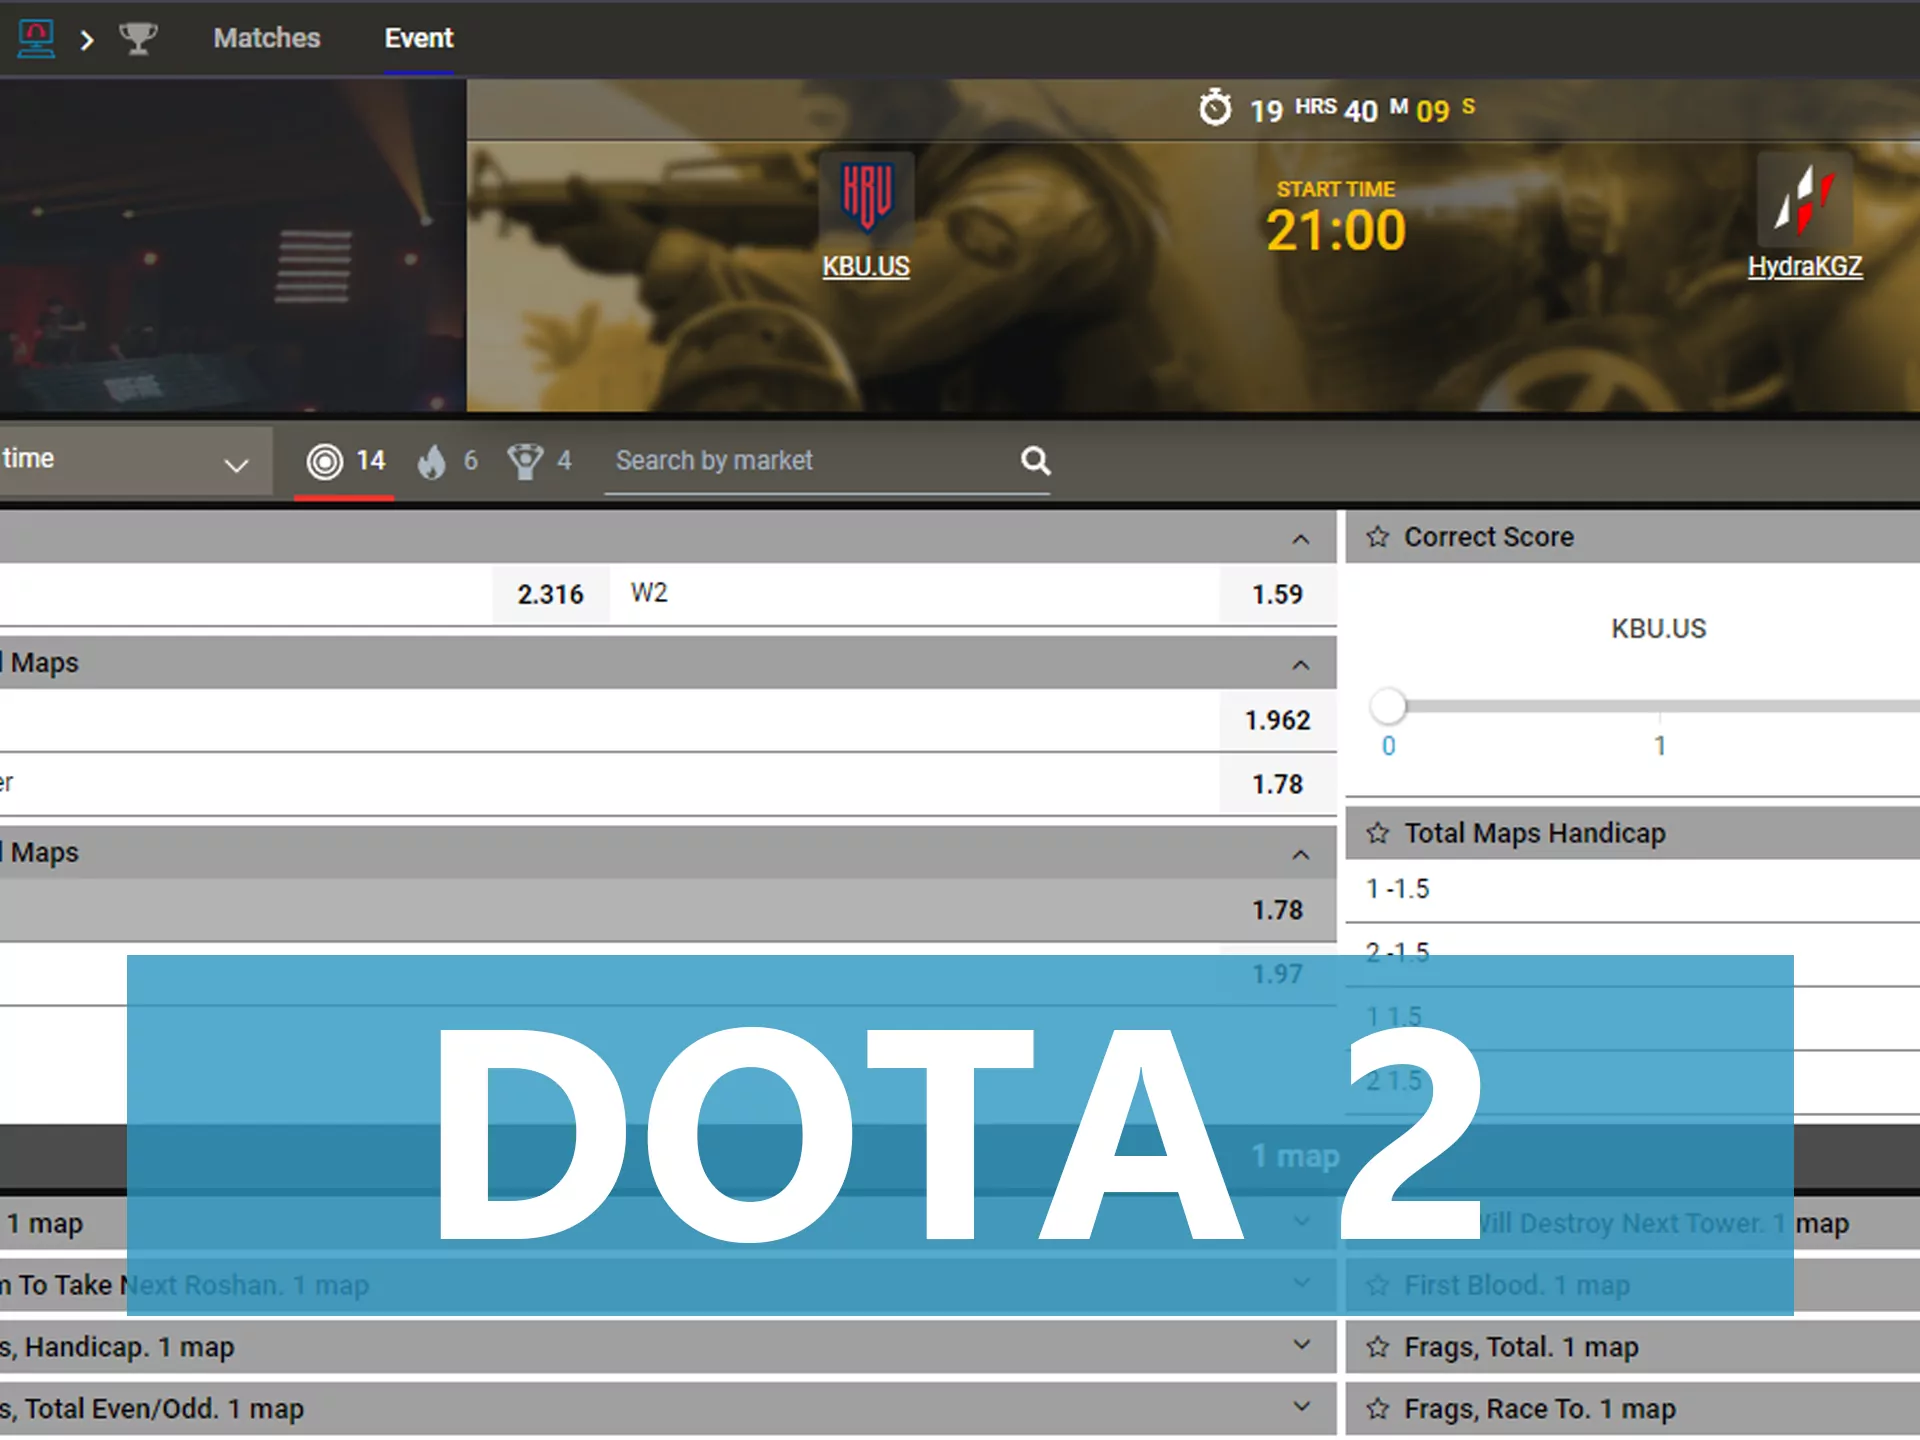 Watch Dota matches and place bets on it.